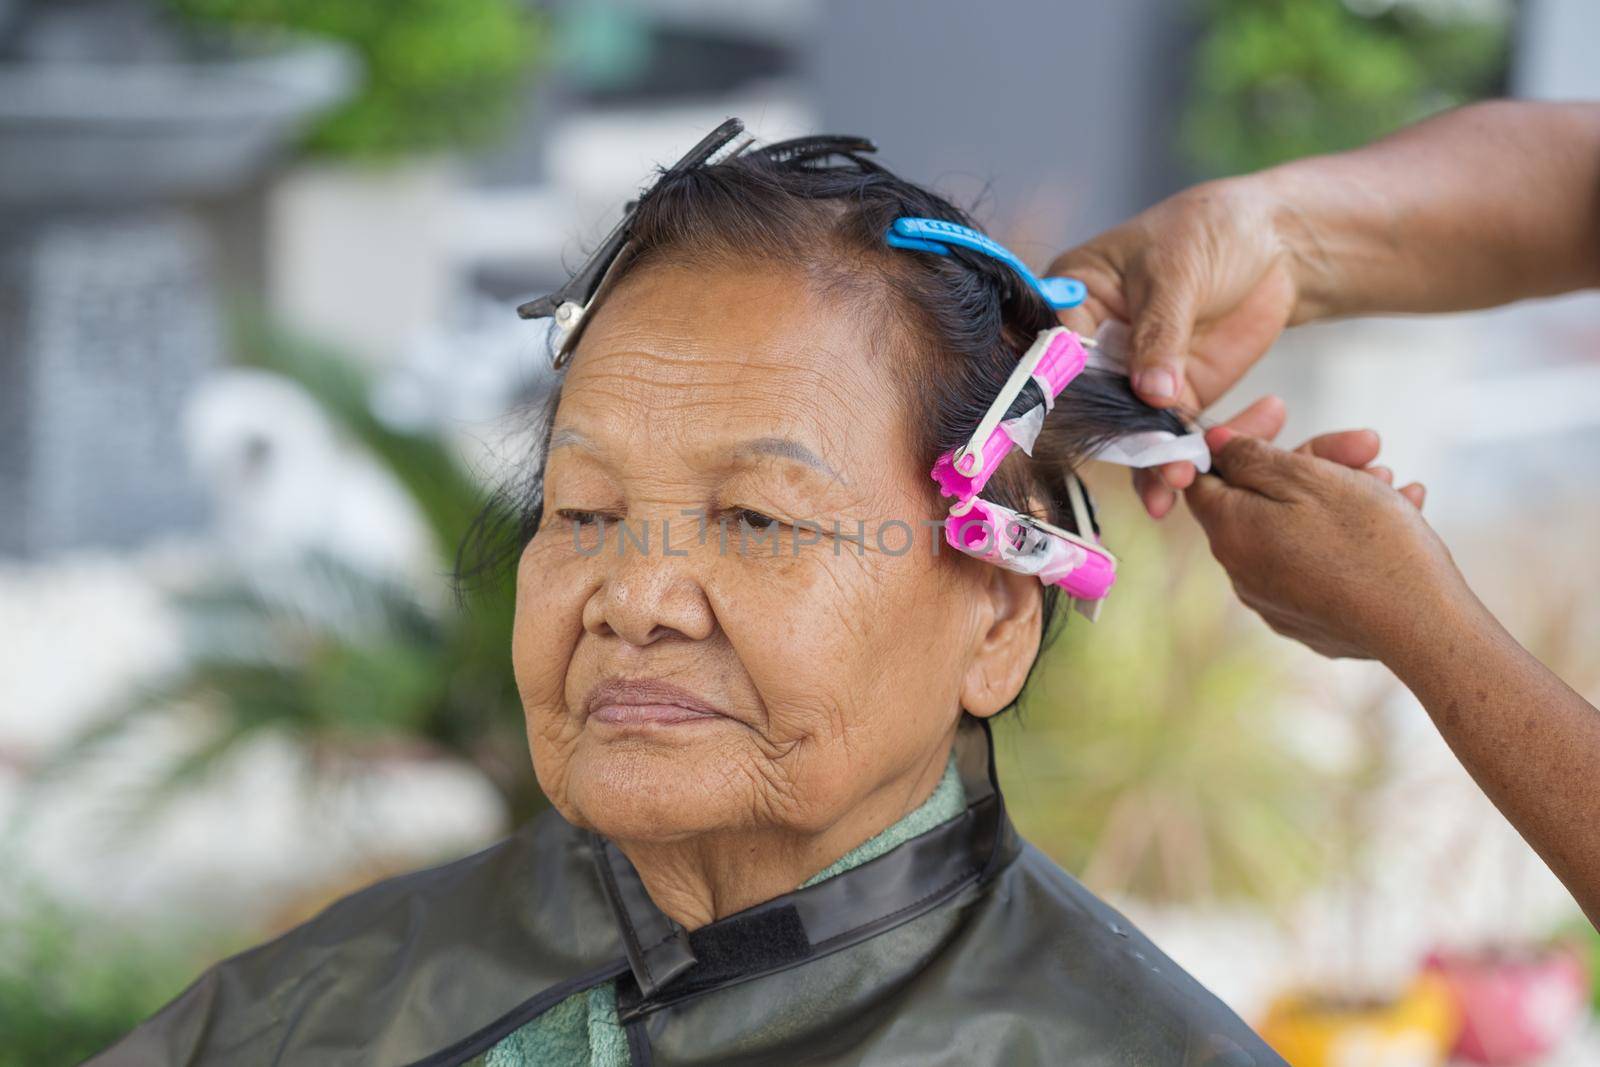 hand of a hairstylist doing a perm rolling the hair of senior woman